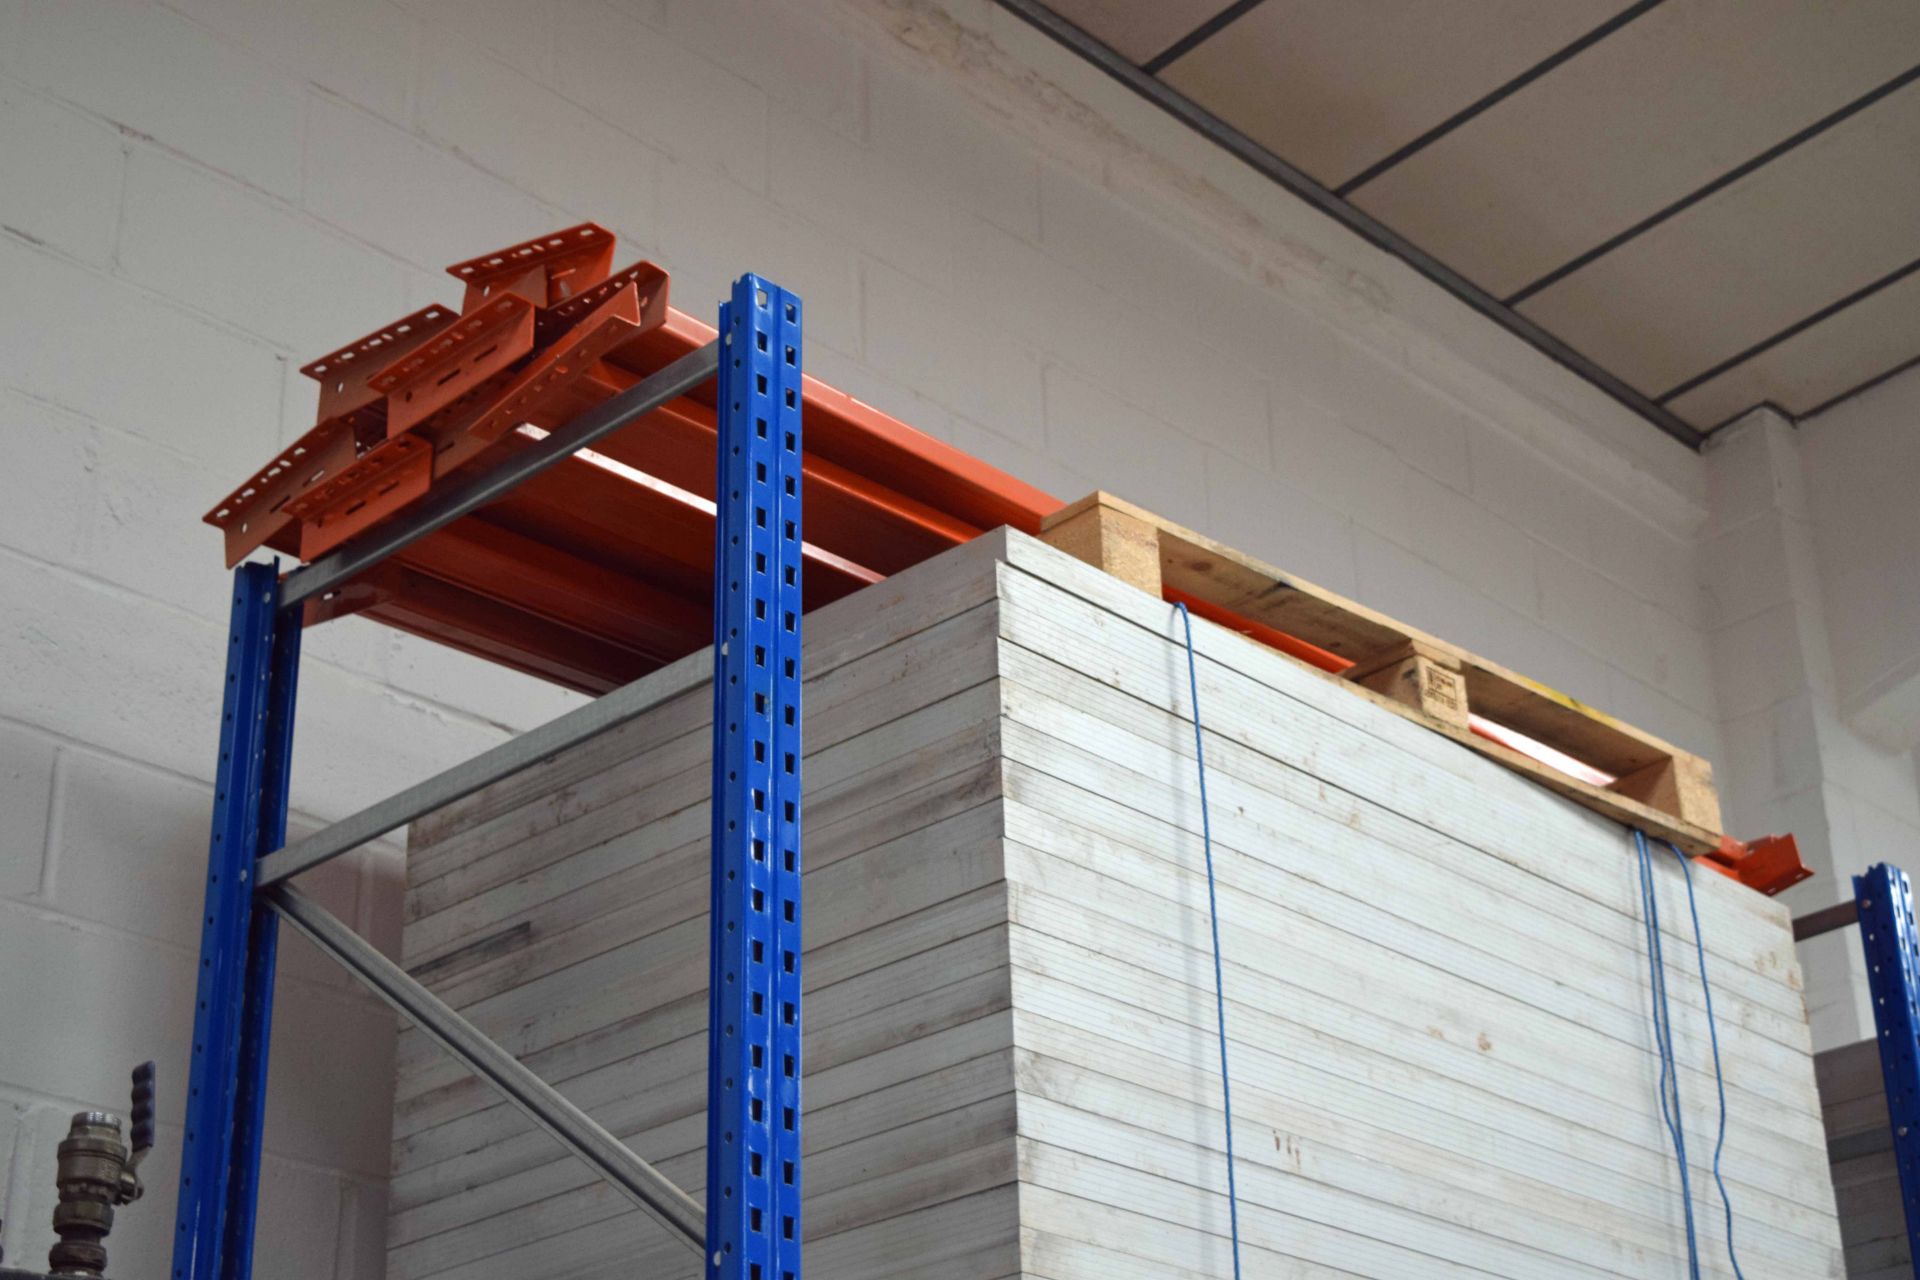 Nine Bays of Heavy Duty Pallet Racking comprising Eleven 4.6M x 0.9M Uprights, Thirty Six 2.9M Beams - Image 3 of 3